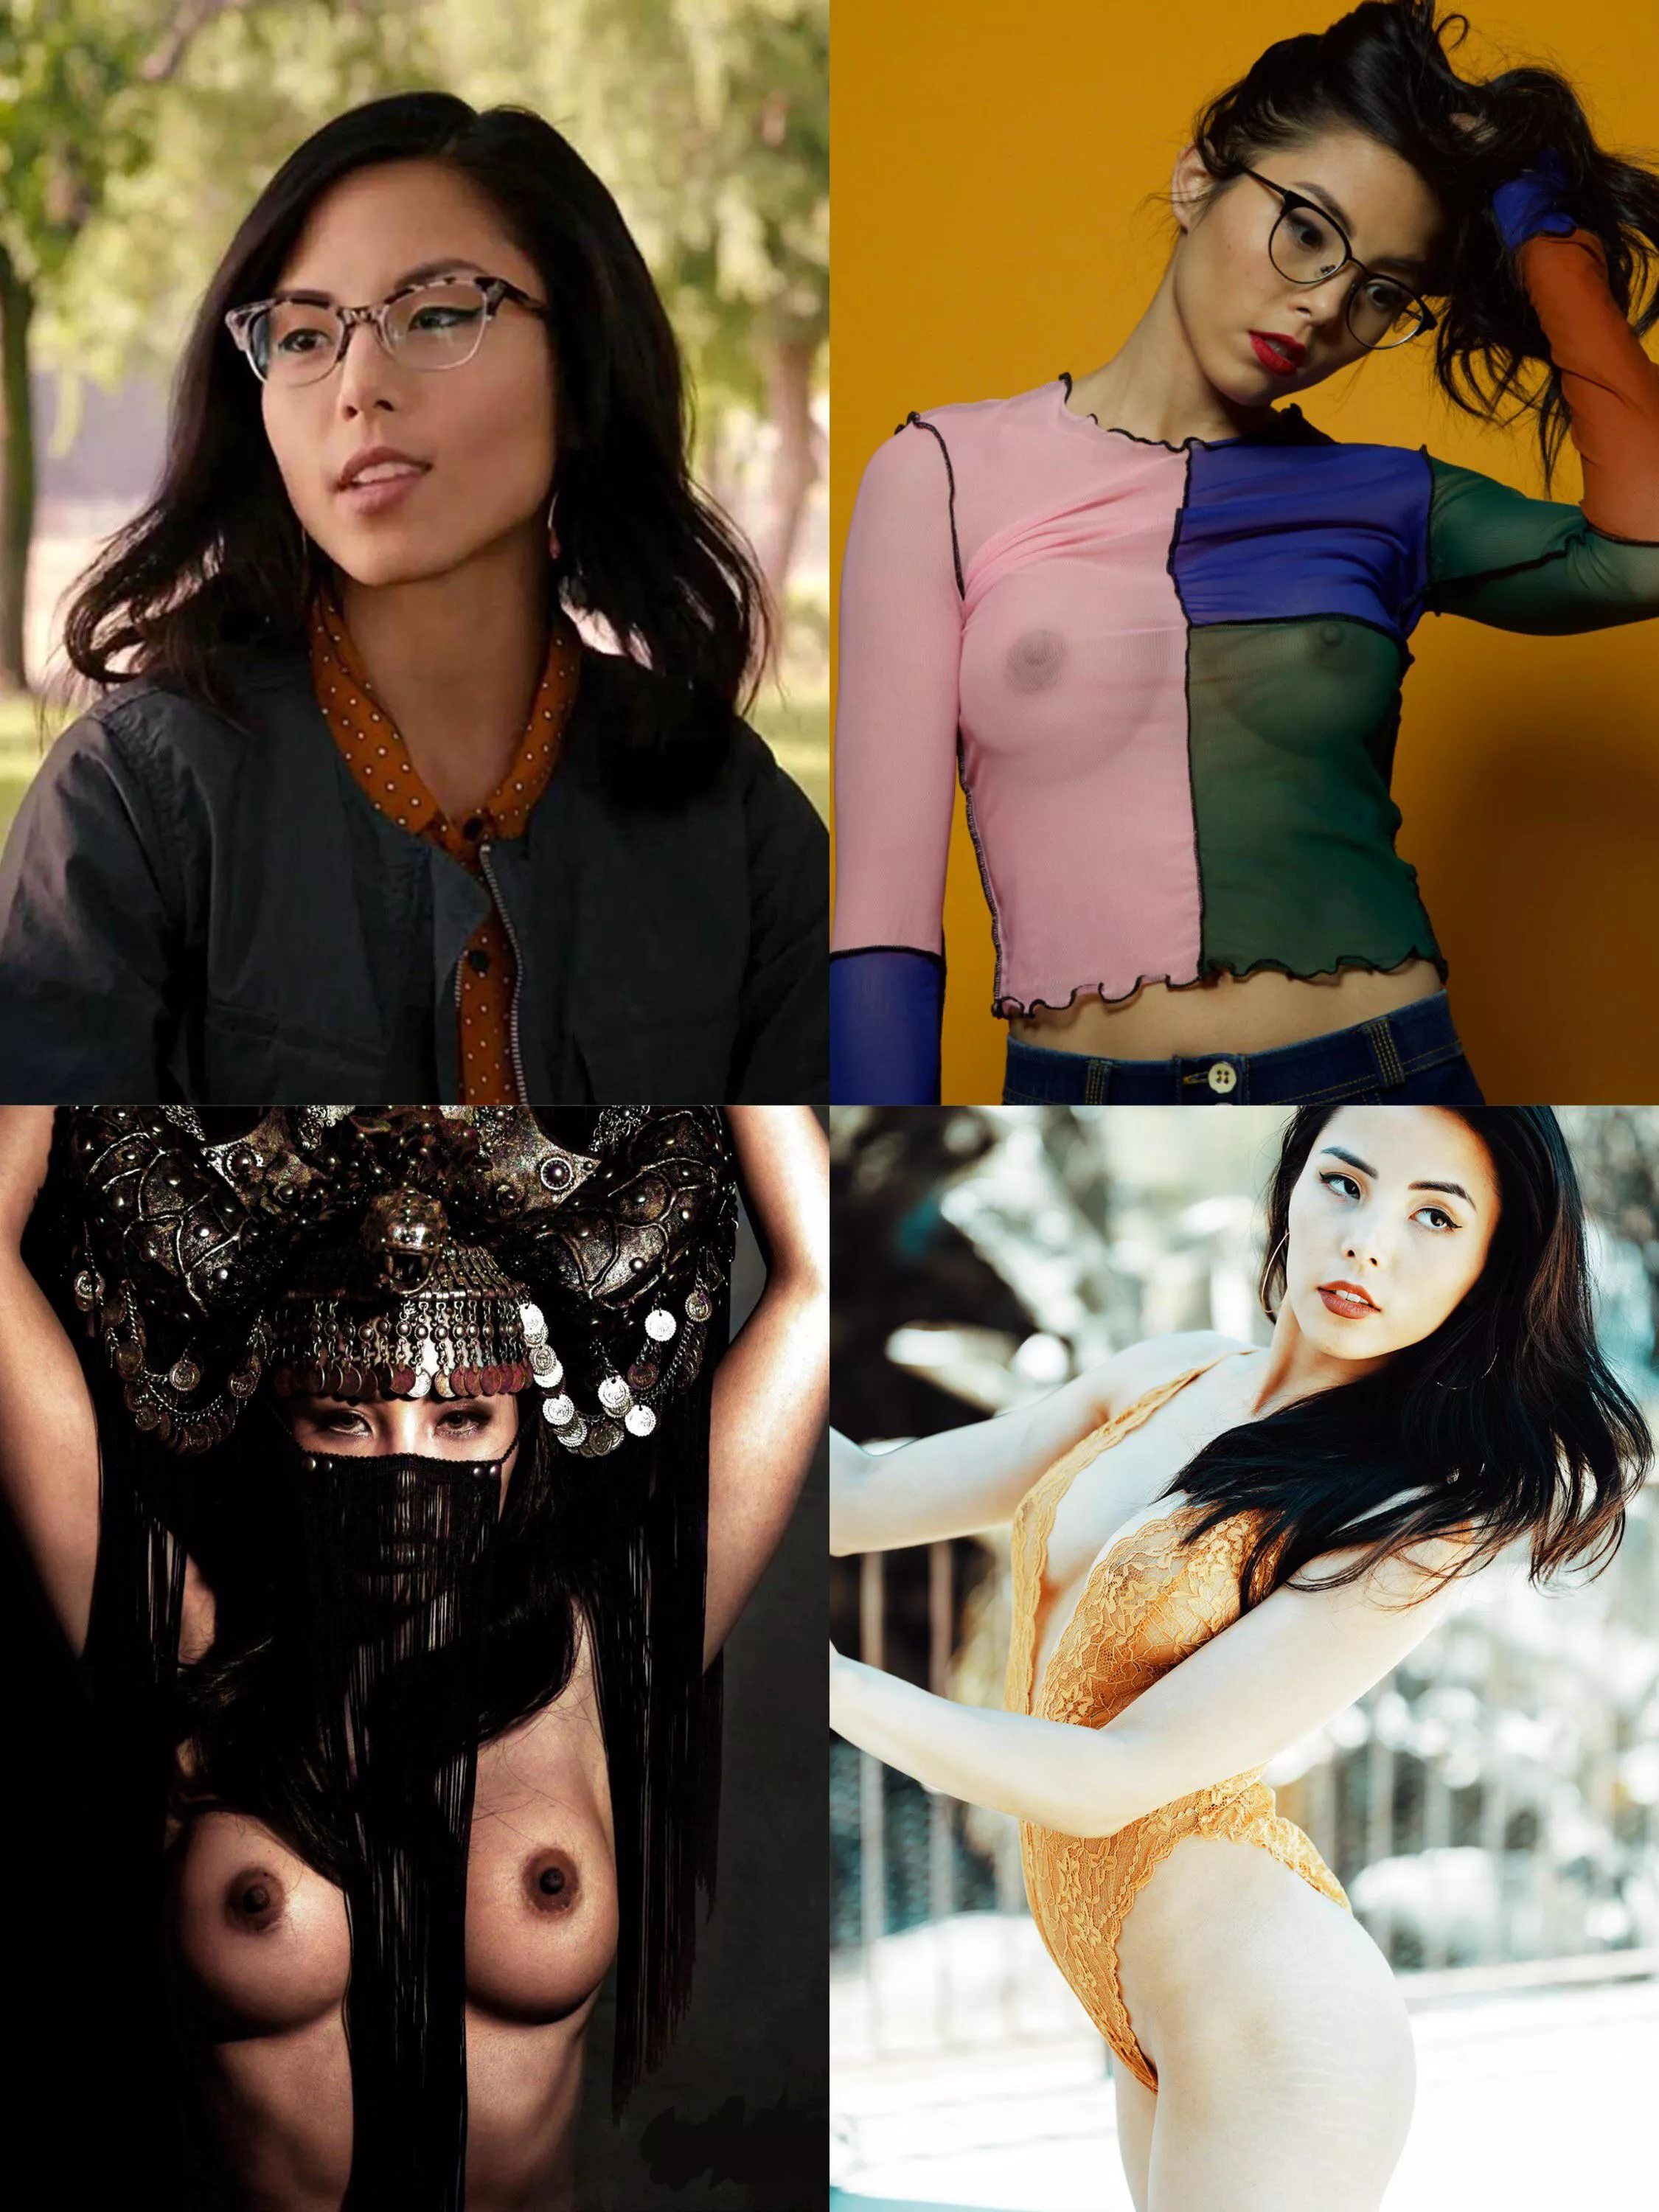 51 Nude Pictures Of Anna Akana Exhibit Her As A Skilled